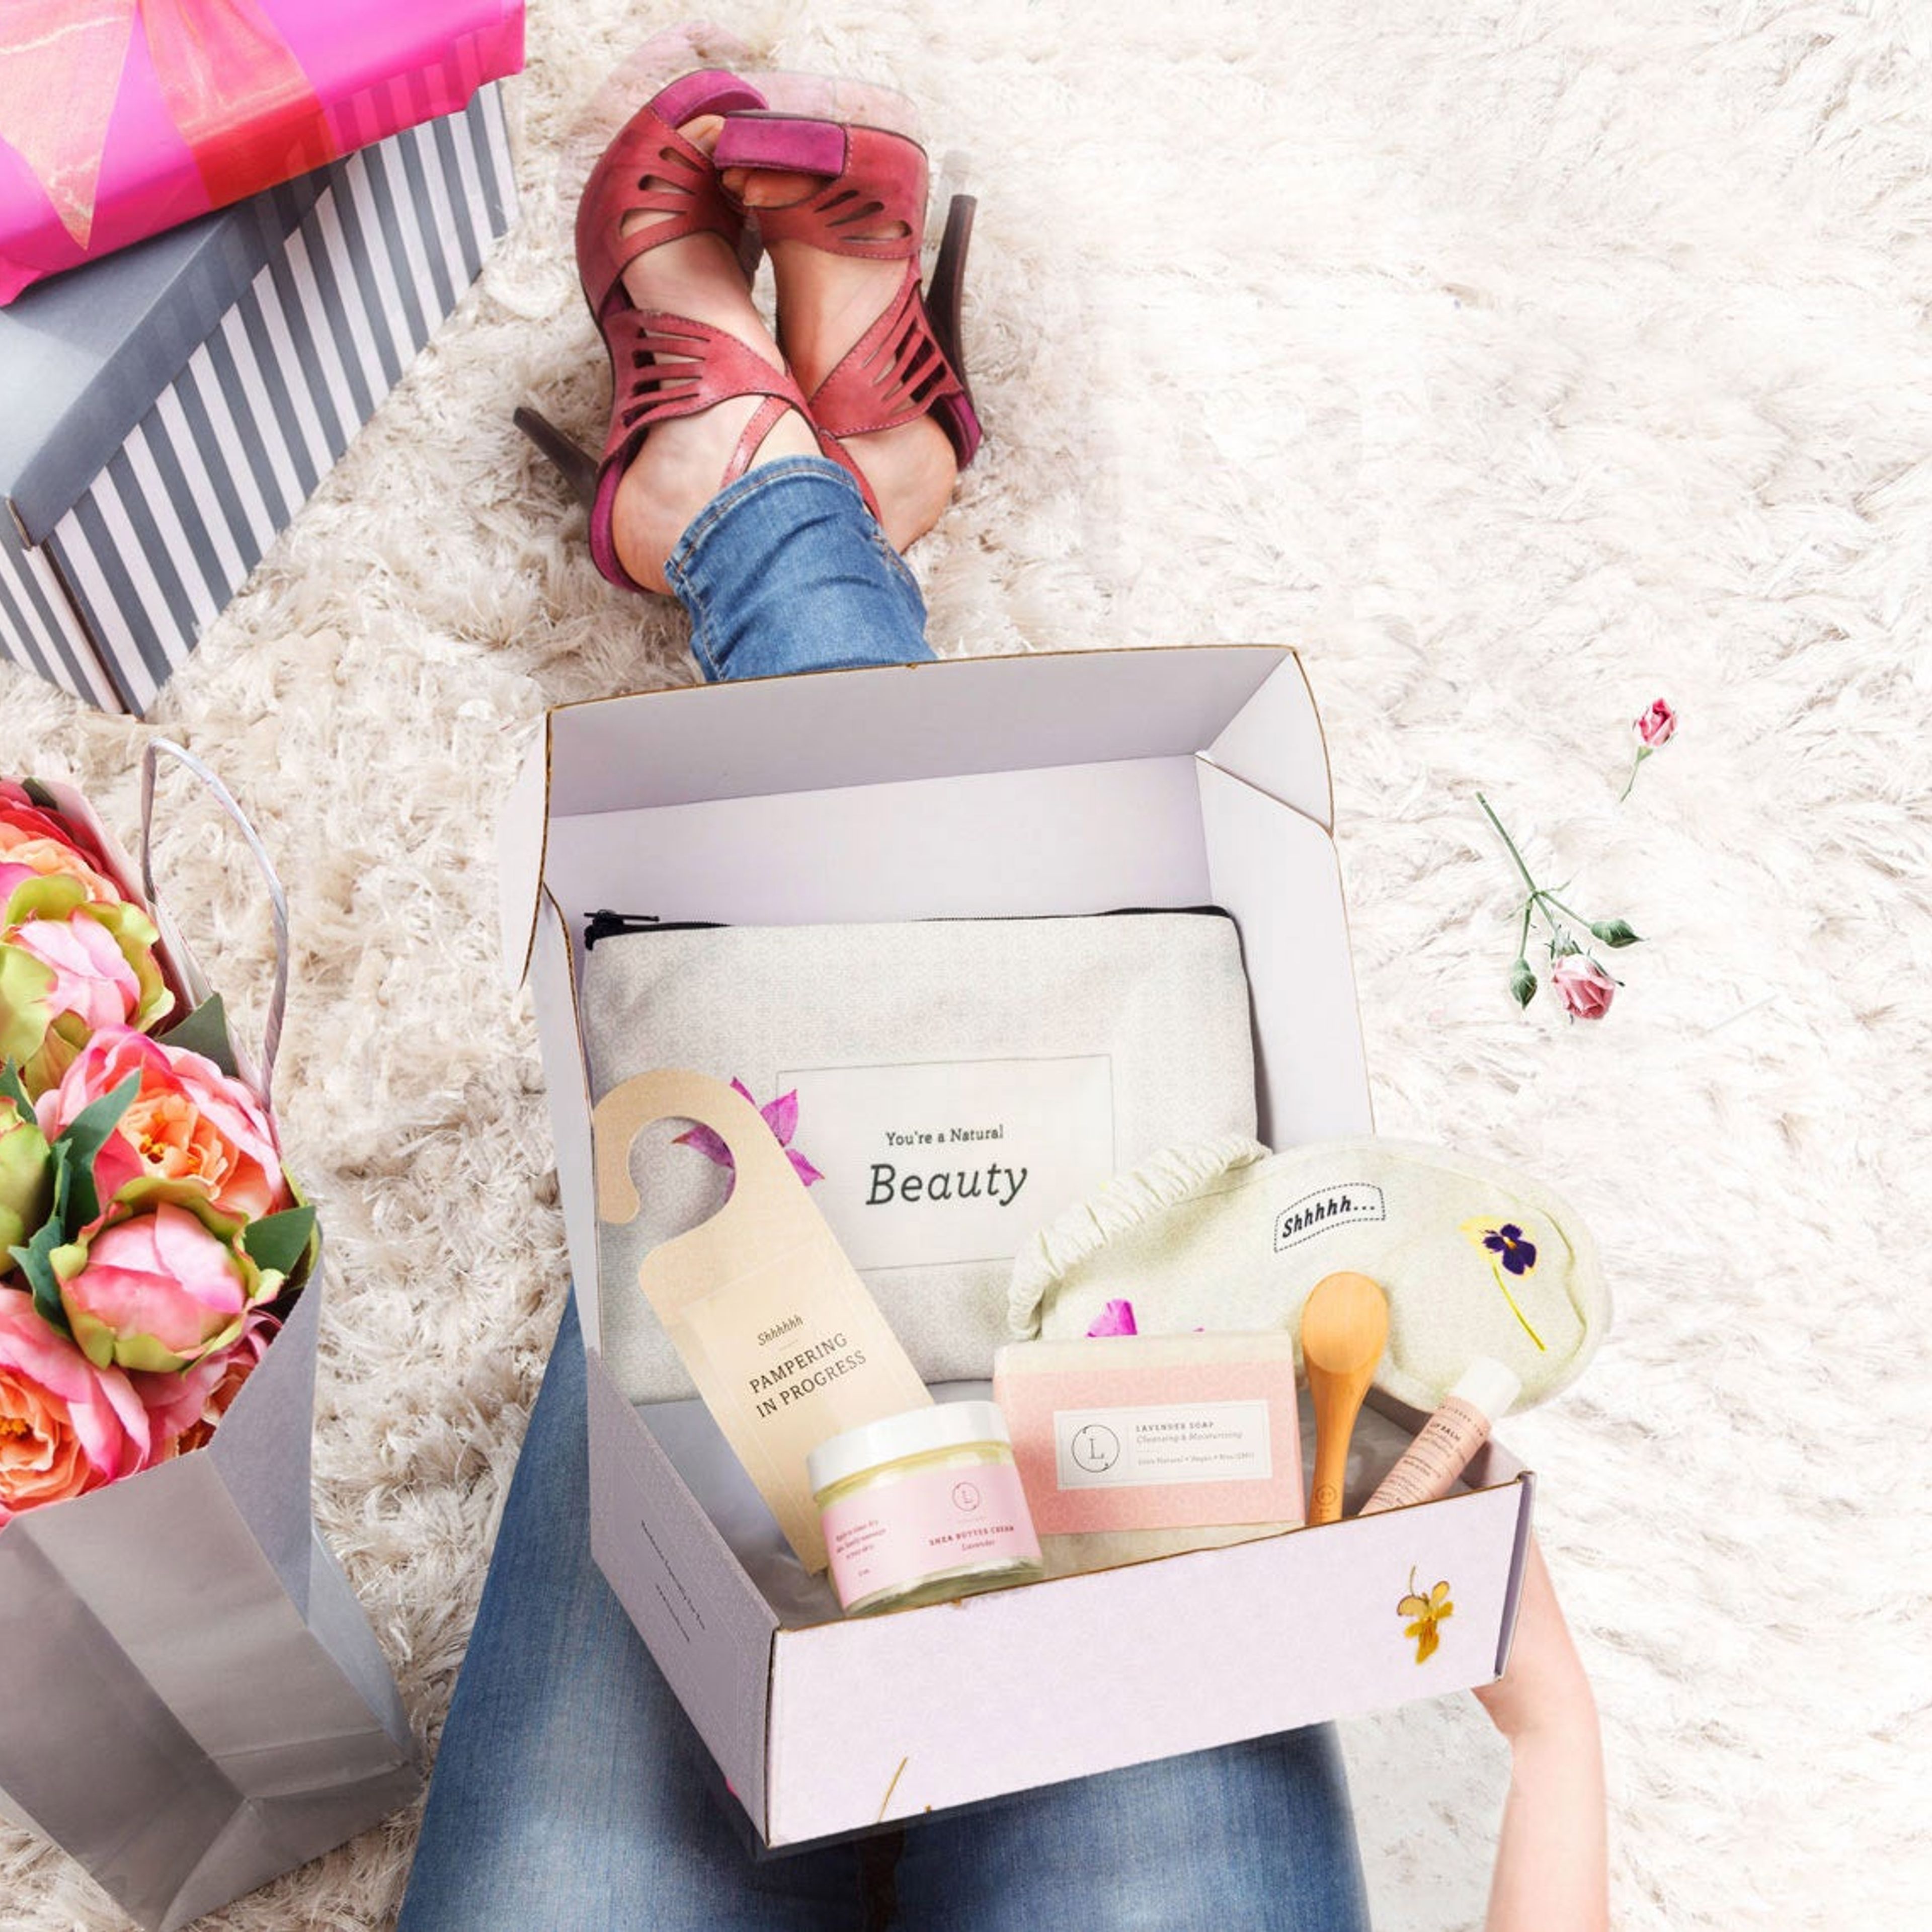 One year of self-care SUBSCRIPTION BOXES for WOMEN - Will be shipped every 3 months